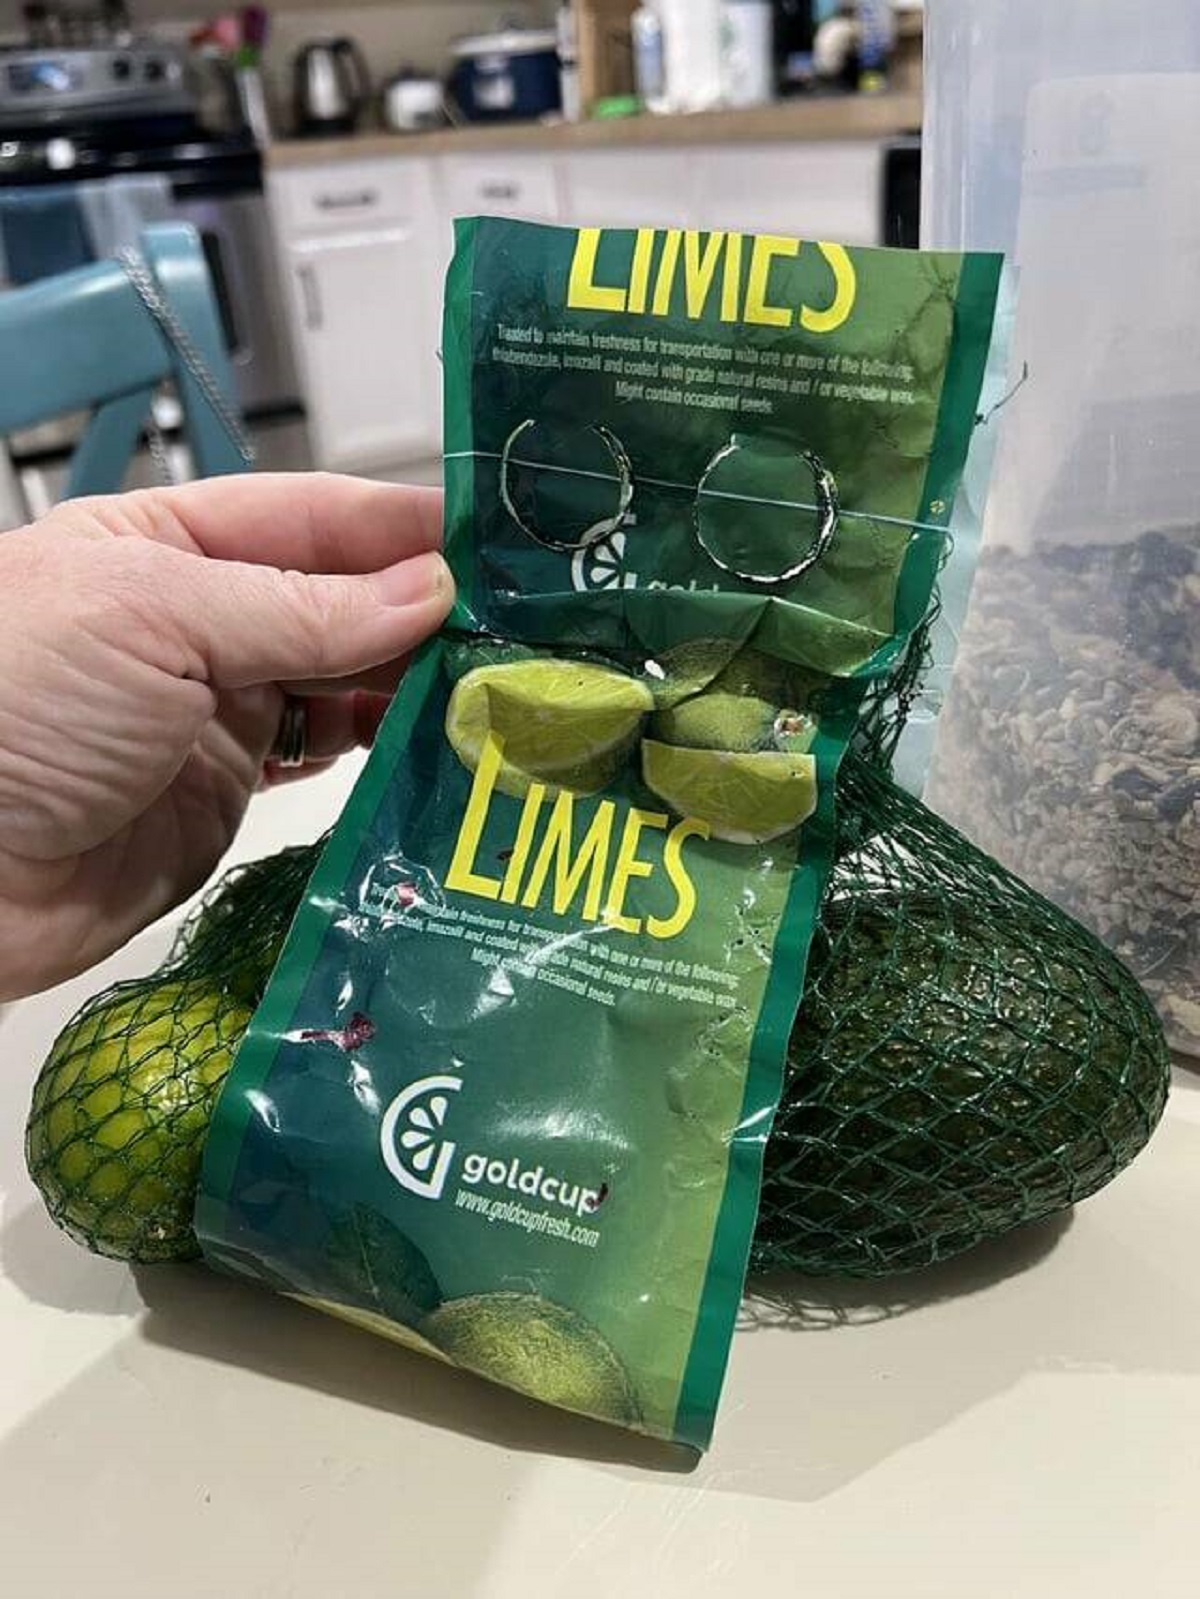 "There is an avocado in my bag of limes."